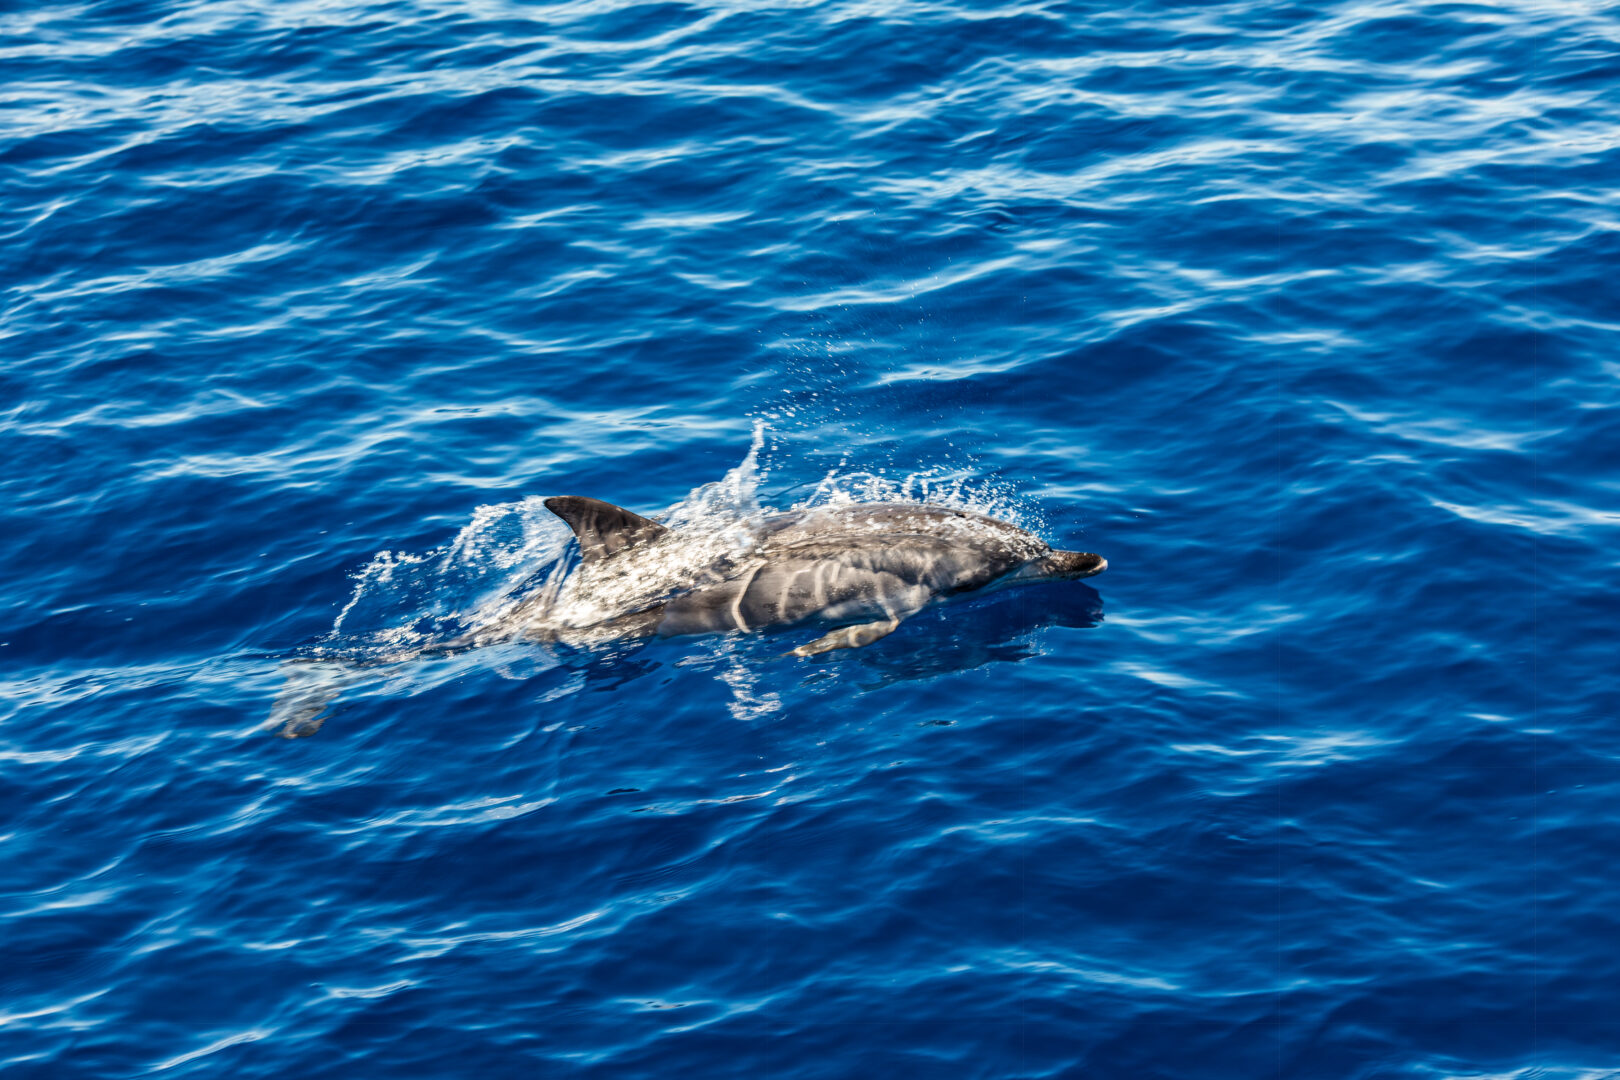 Atlantic striped dolphins near the Azores Island. Dolphin in the ocean waves